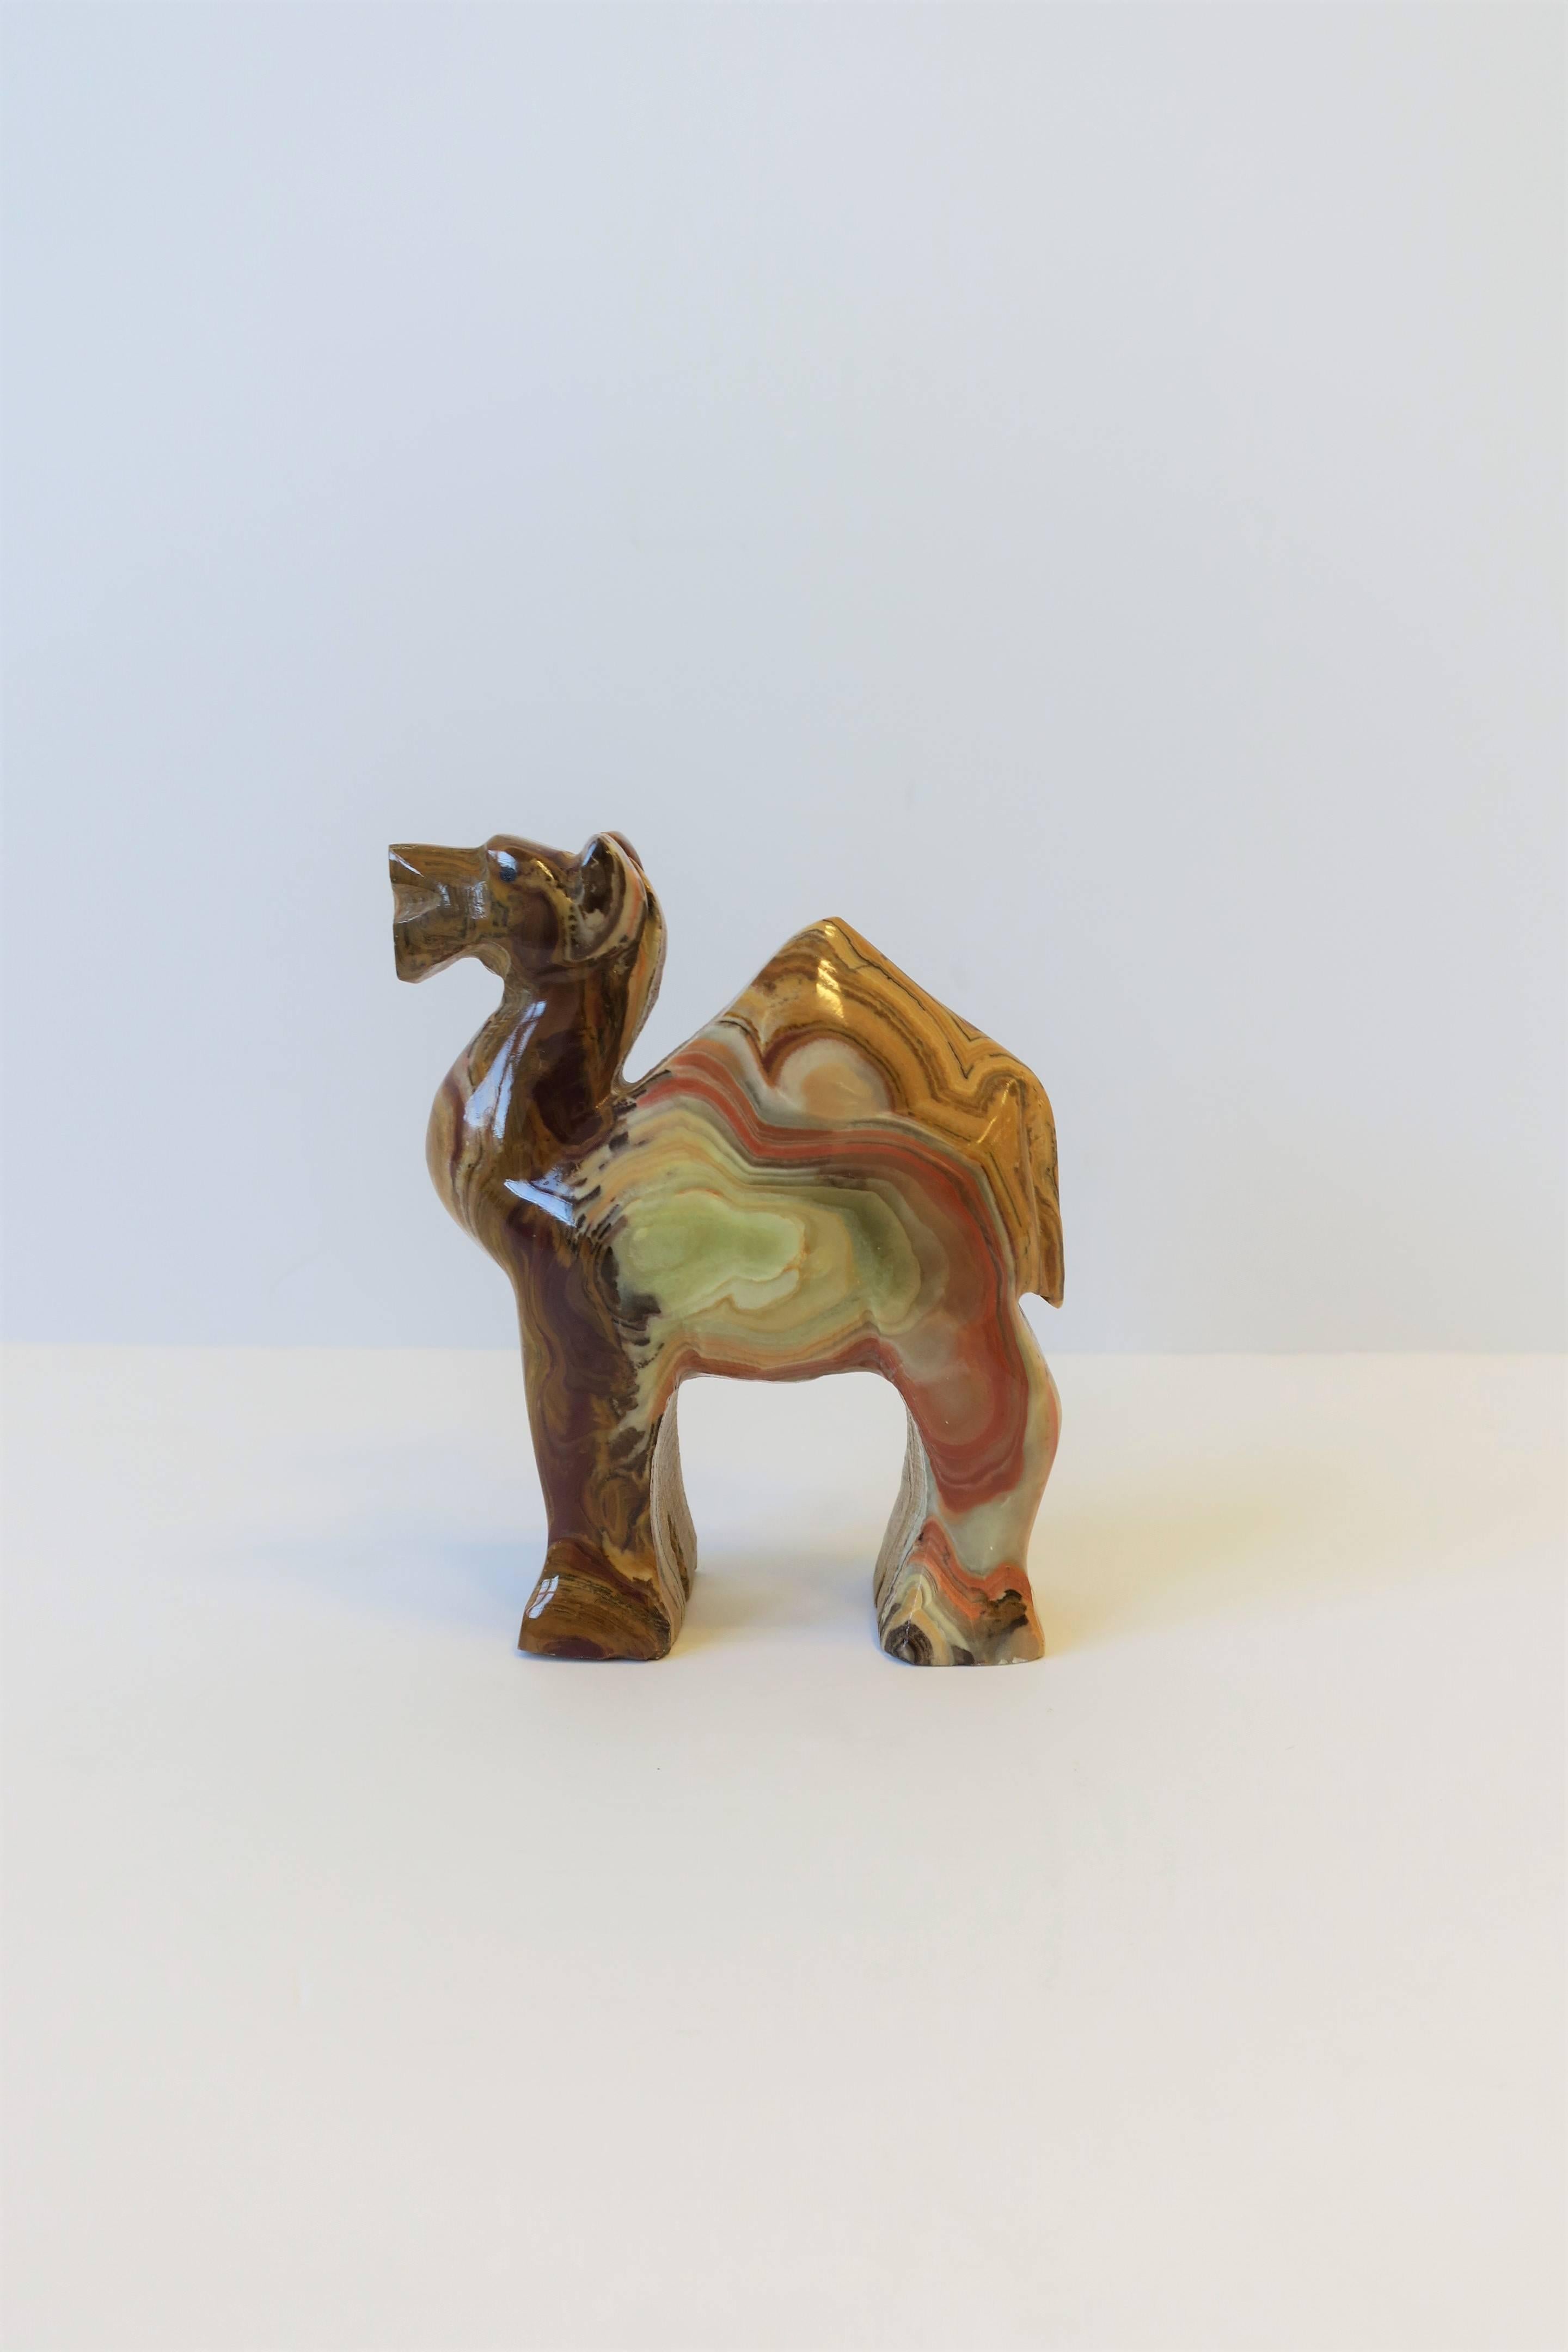 A beautiful vintage onyx marble Camel animal sculpture, circa 1970s. Colors include brown, caramel, cream, green, and pink. Dimensions: 4.5